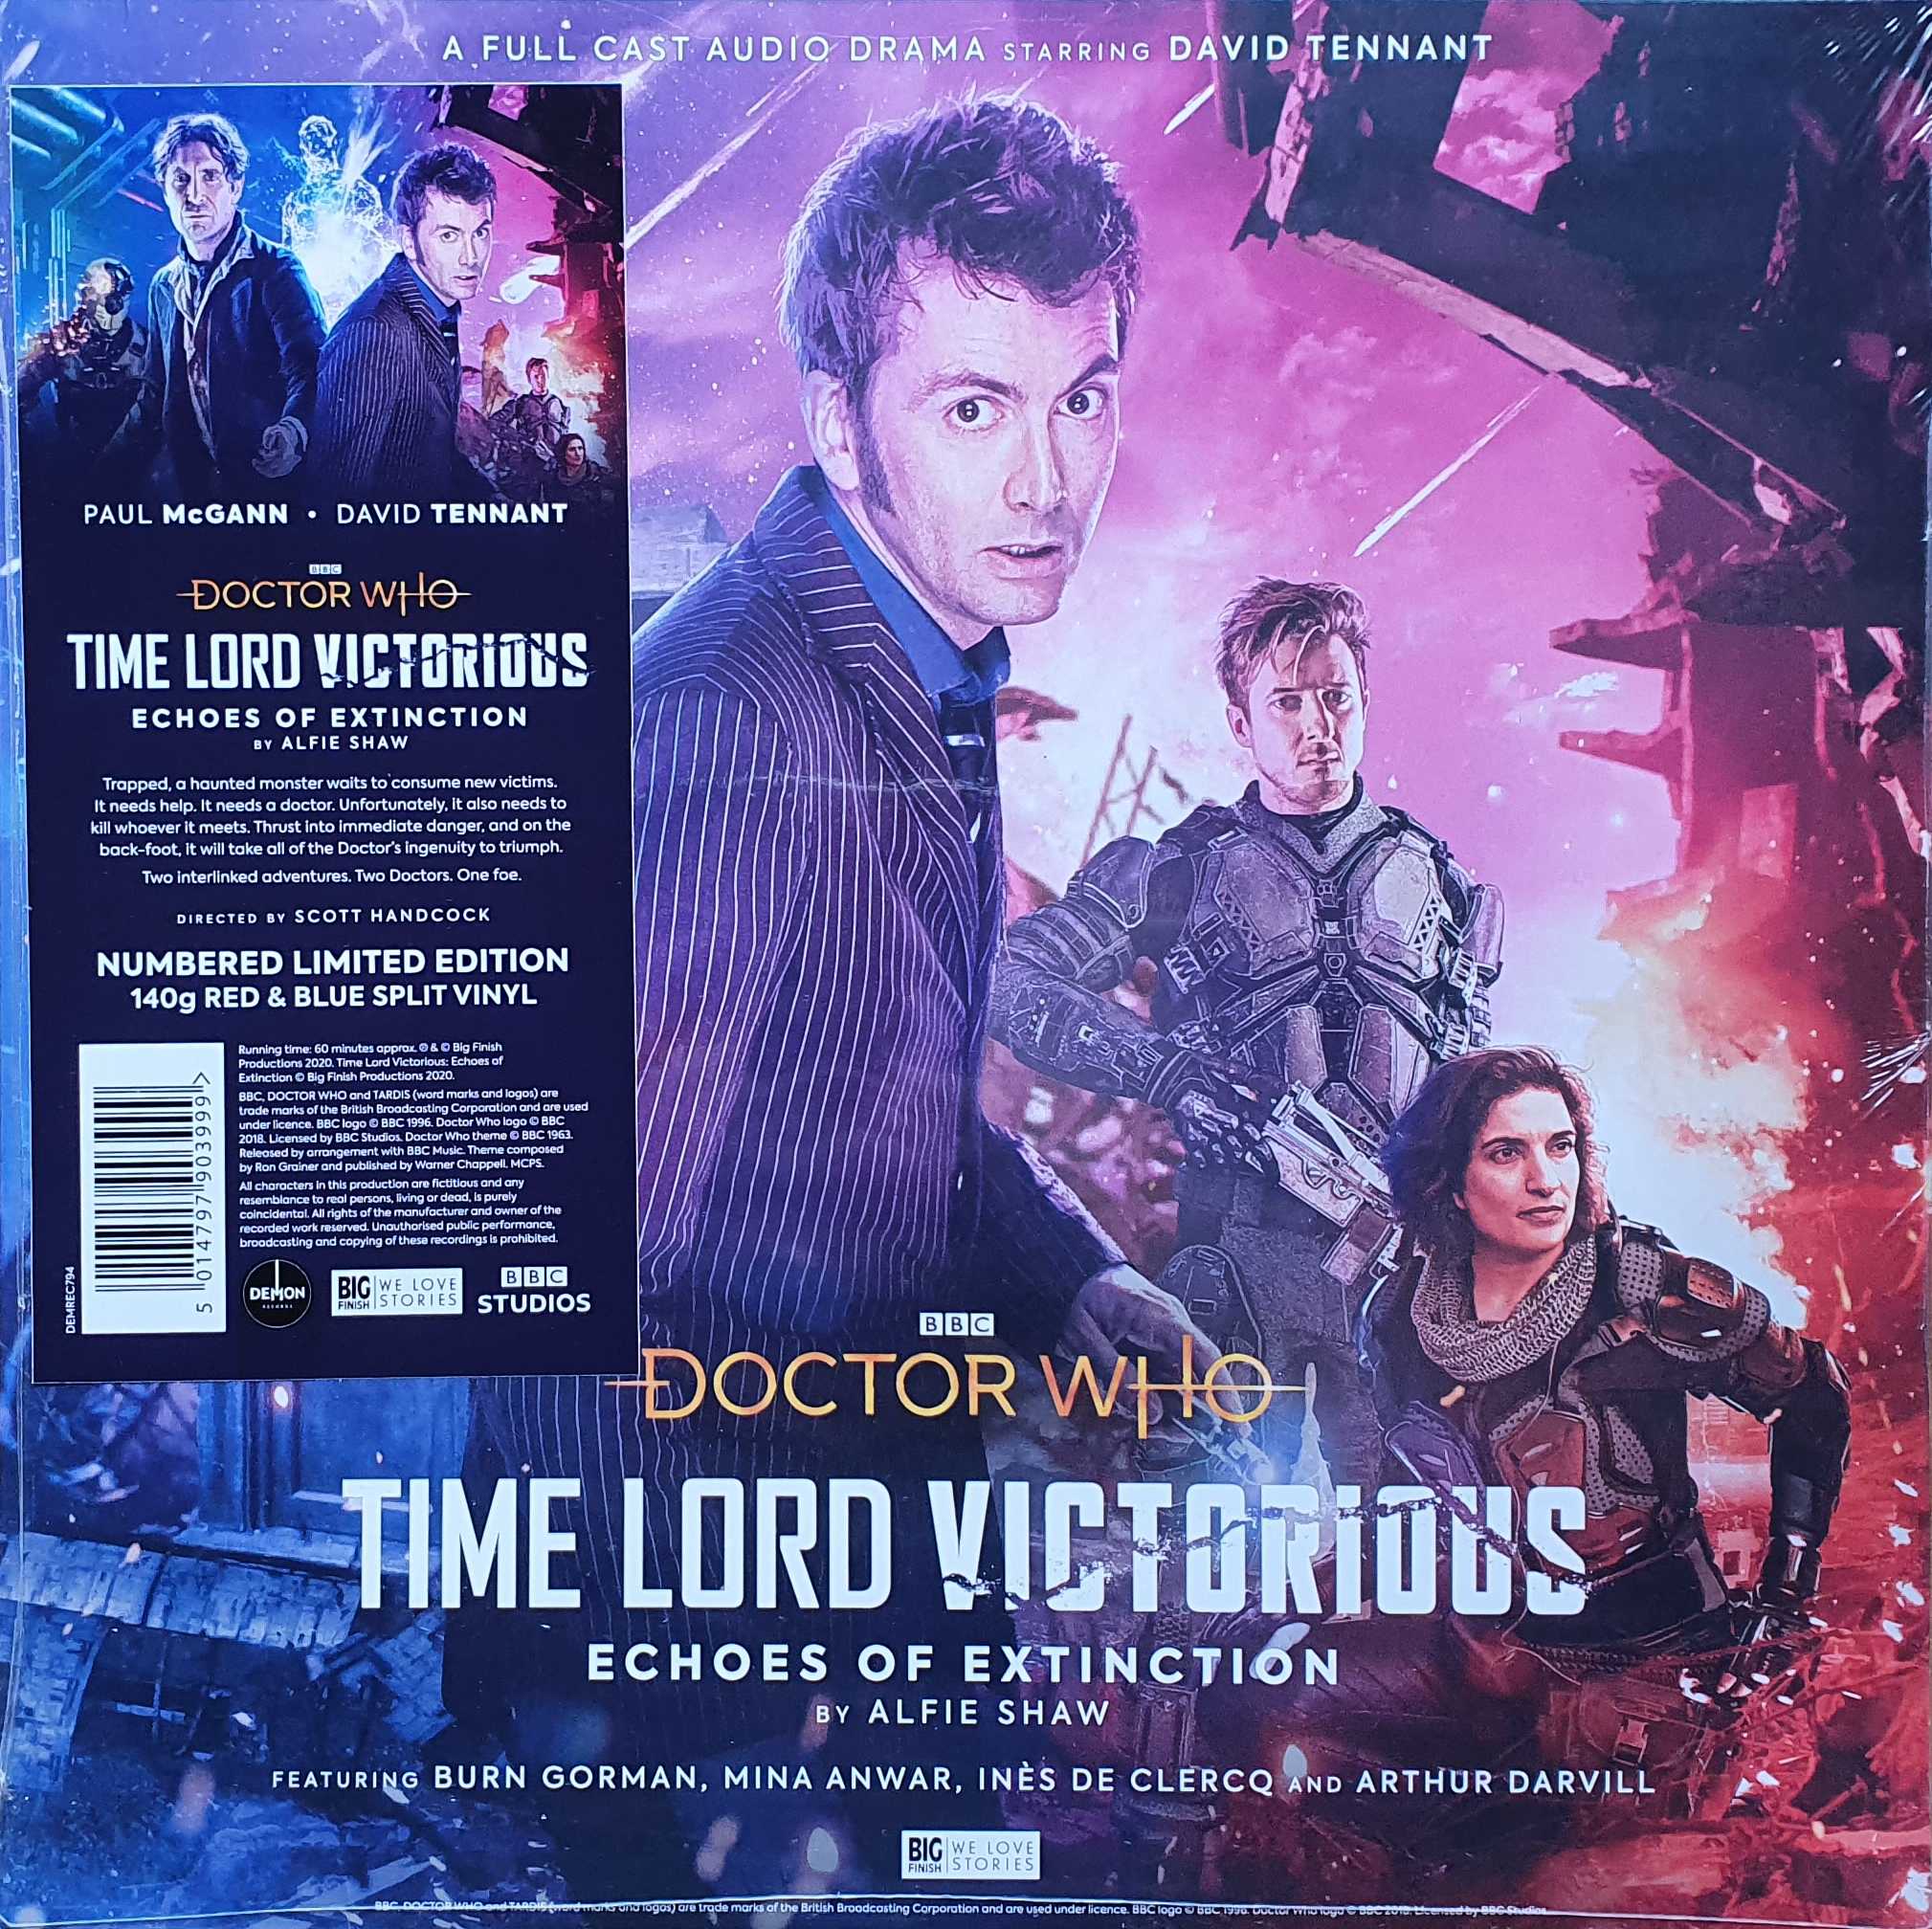 Picture of DEMREC 794 Time Lord victorious - Echoes of extinction by artist Alfie Shaw from the BBC records and Tapes library